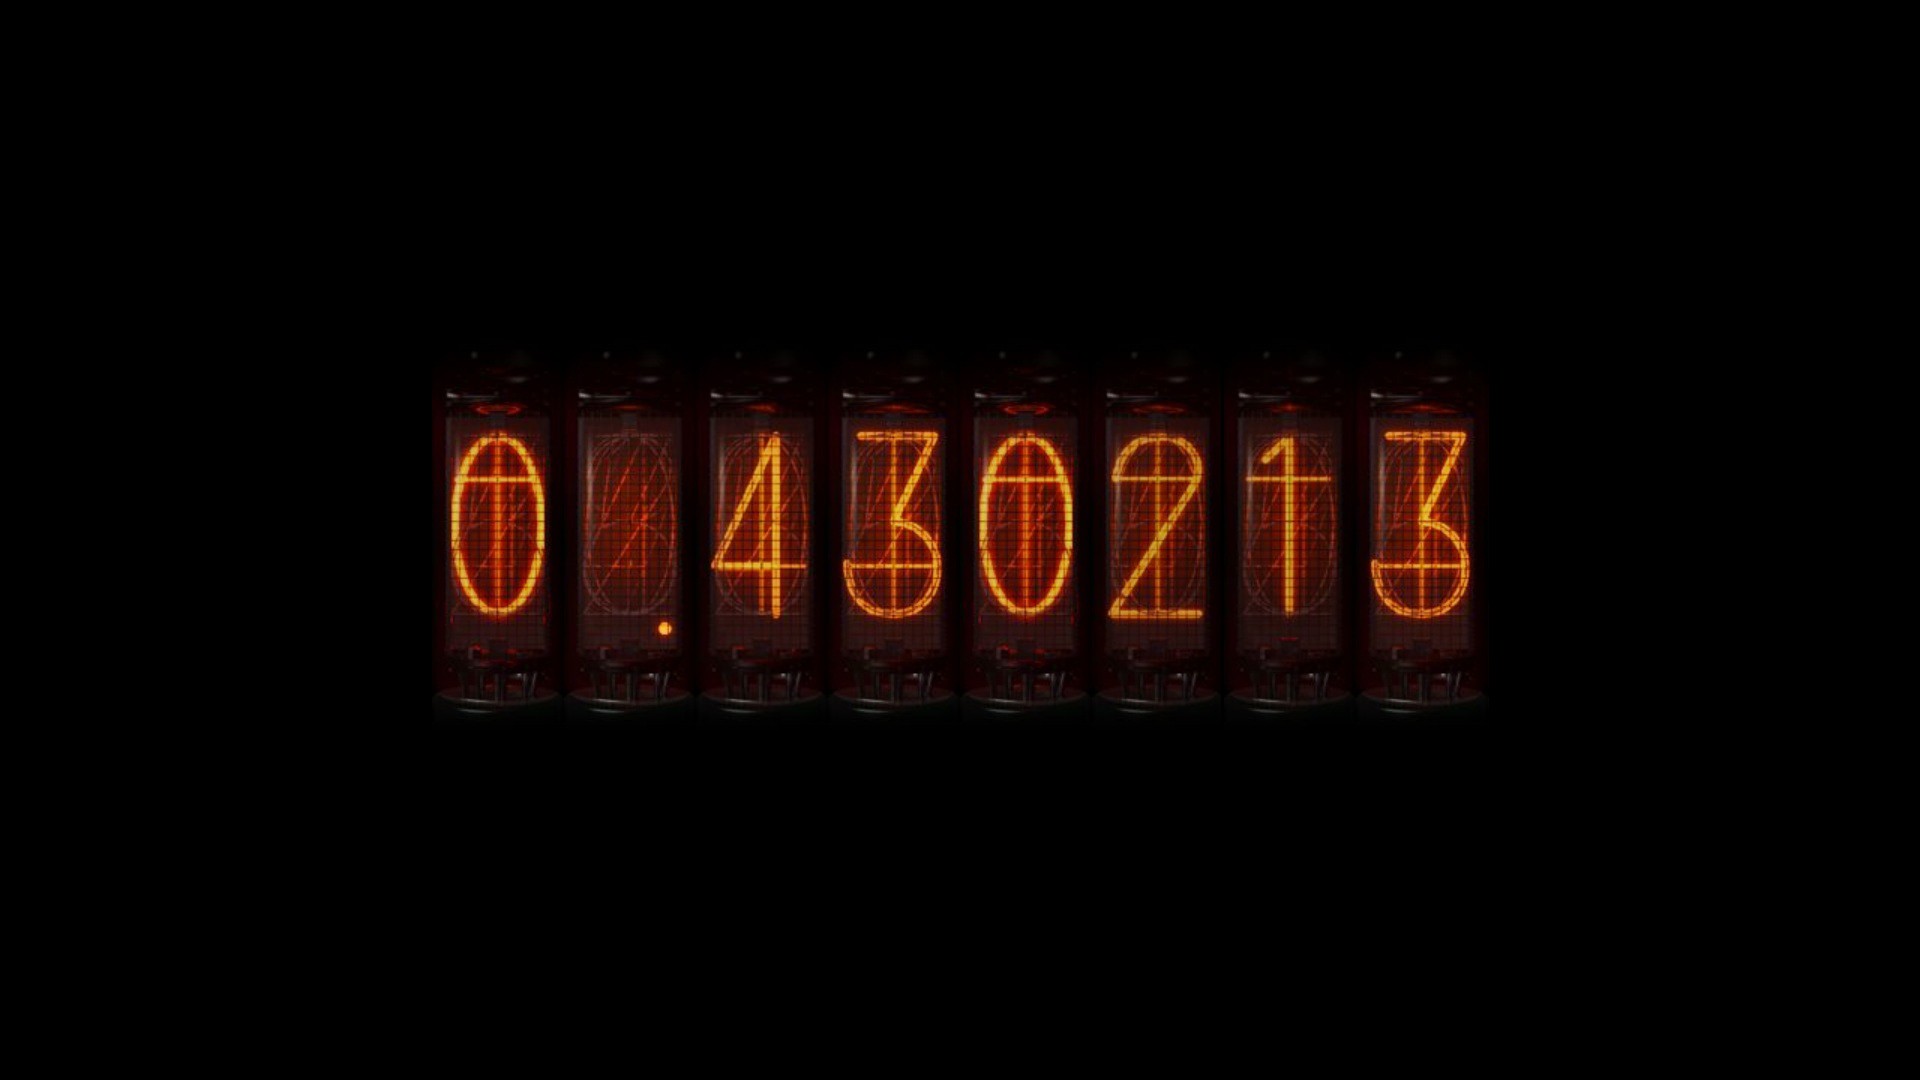 Steins Gate Anime Time Travel Divergence Meter Nixie Tubes Wallpapers Hd Desktop And Mobile Backgrounds